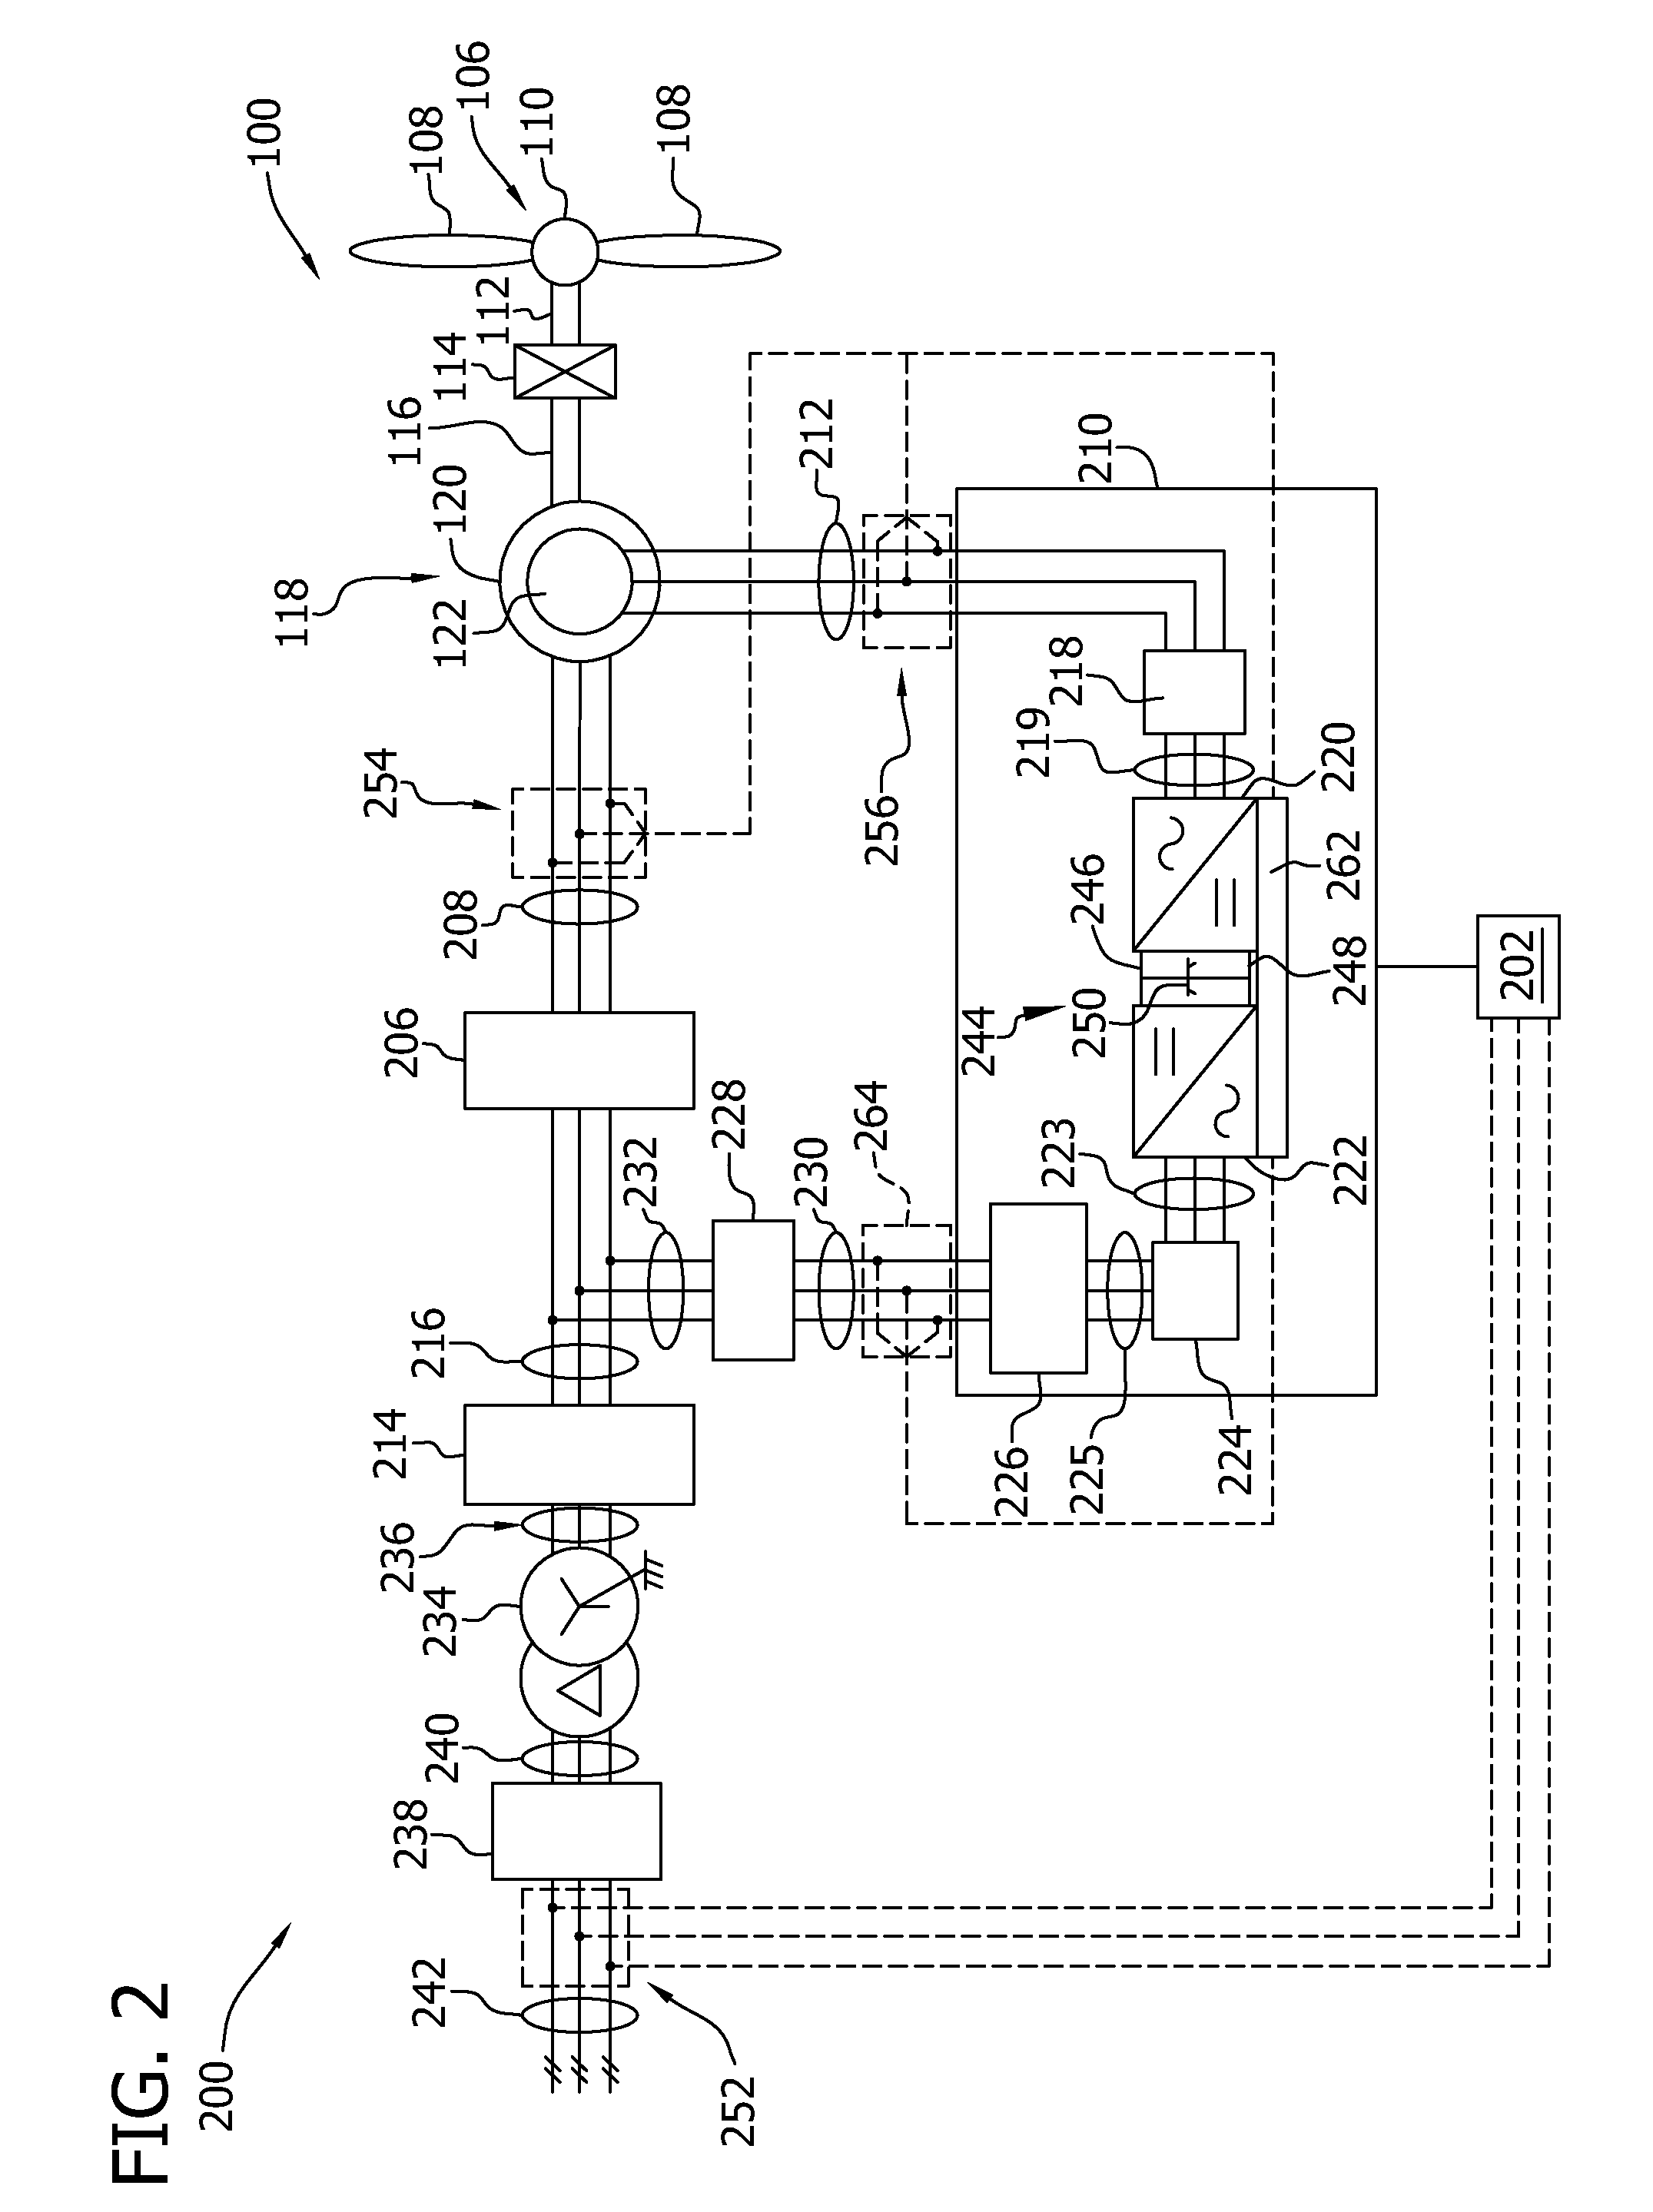 Power plant control system and method for influencing high voltage characteristics